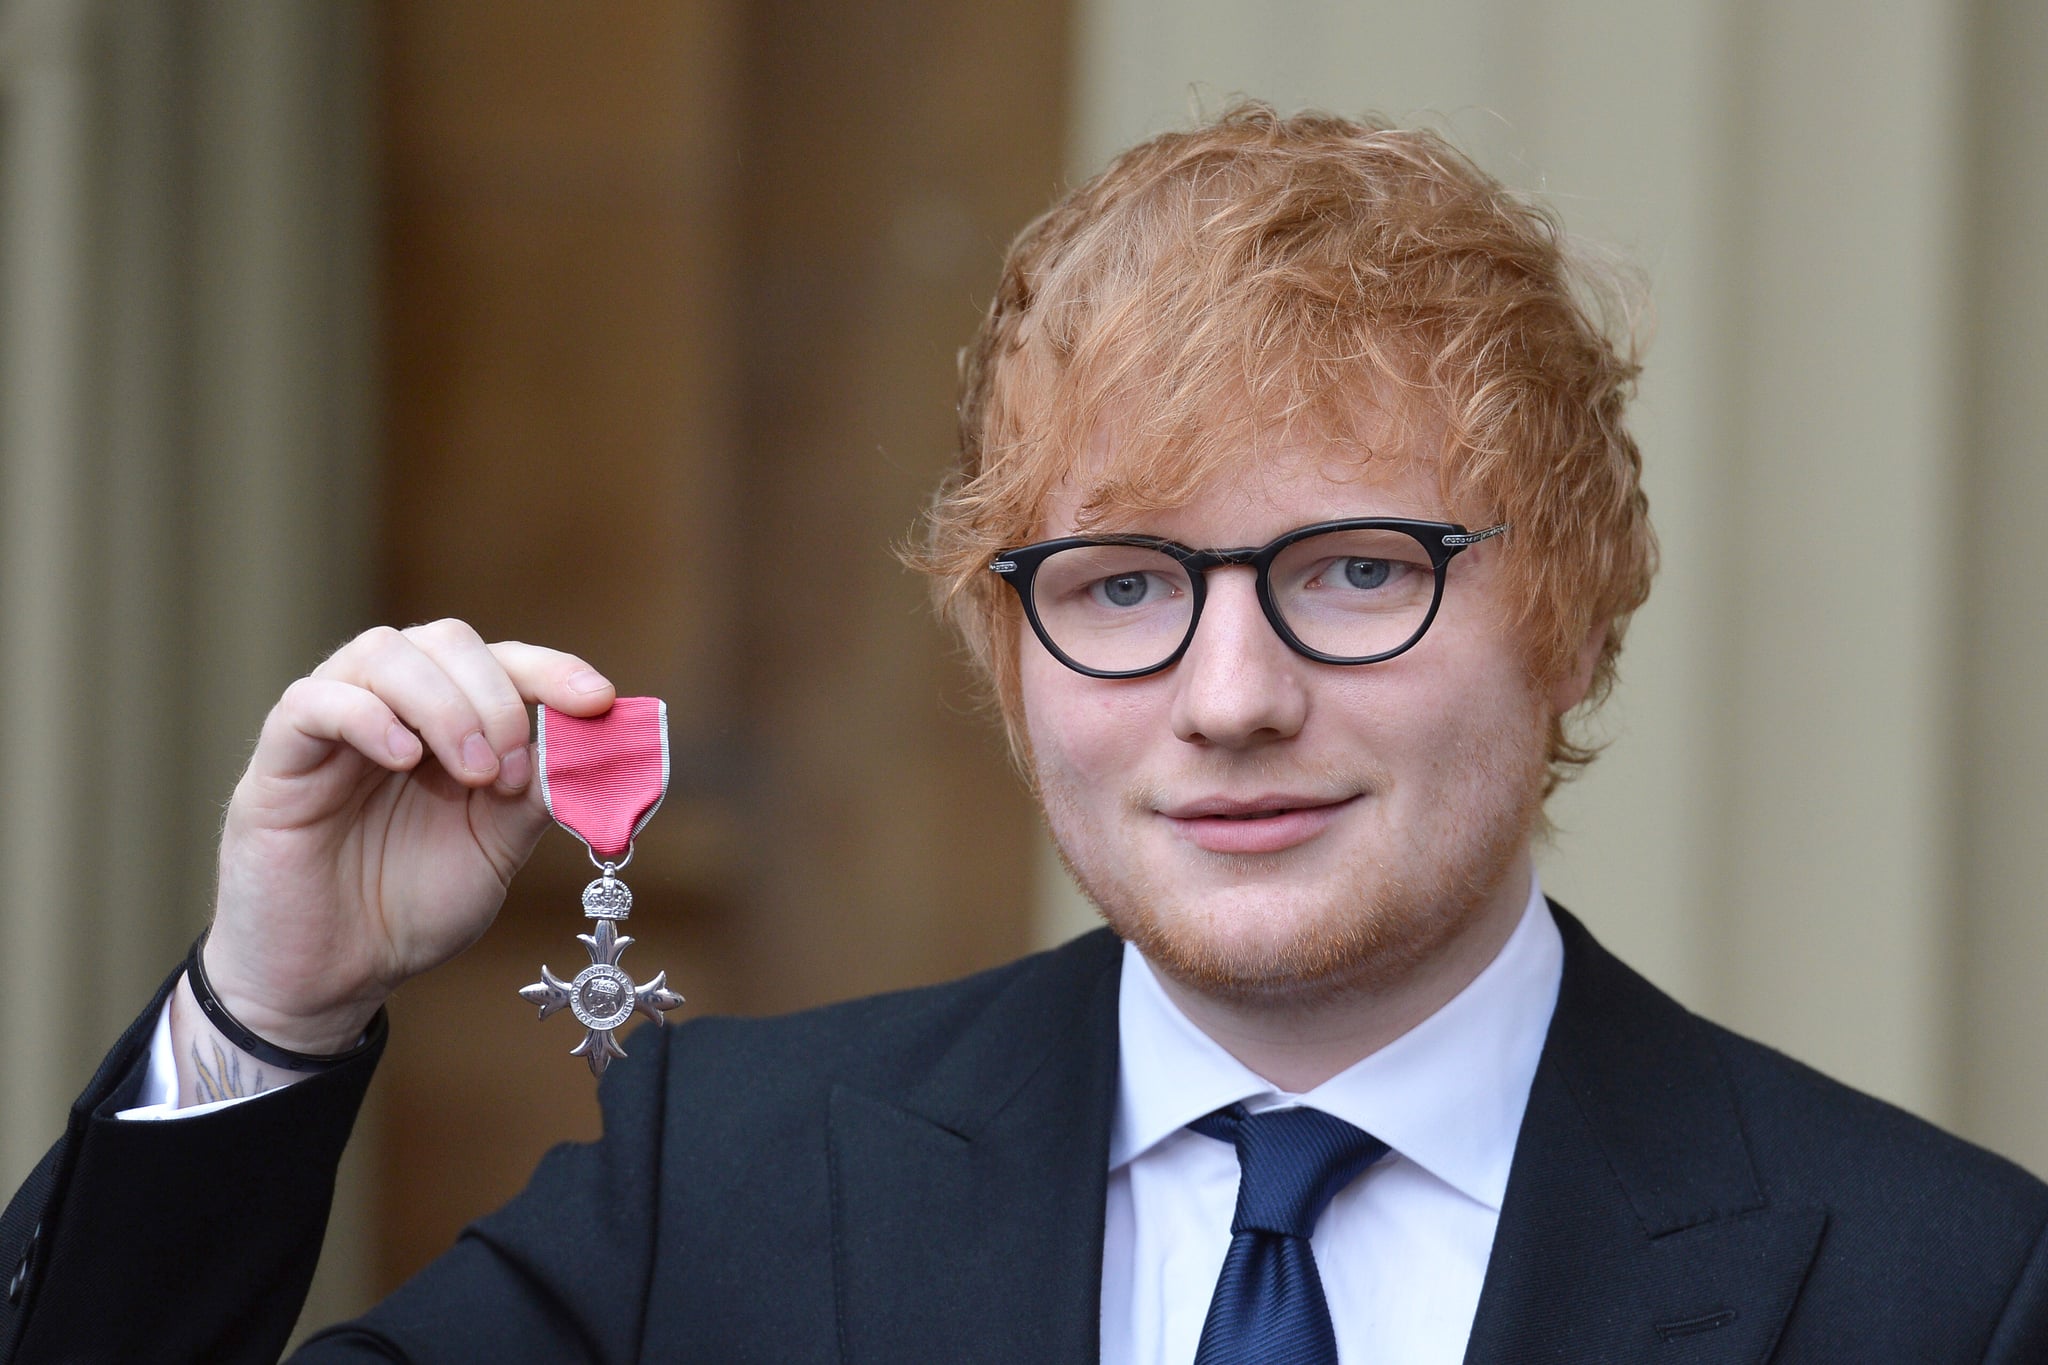 Ed Sheeran Buckingham Palace For MBE Investiture Photos | POPSUGAR Middle  East Celebrity and Entertainment